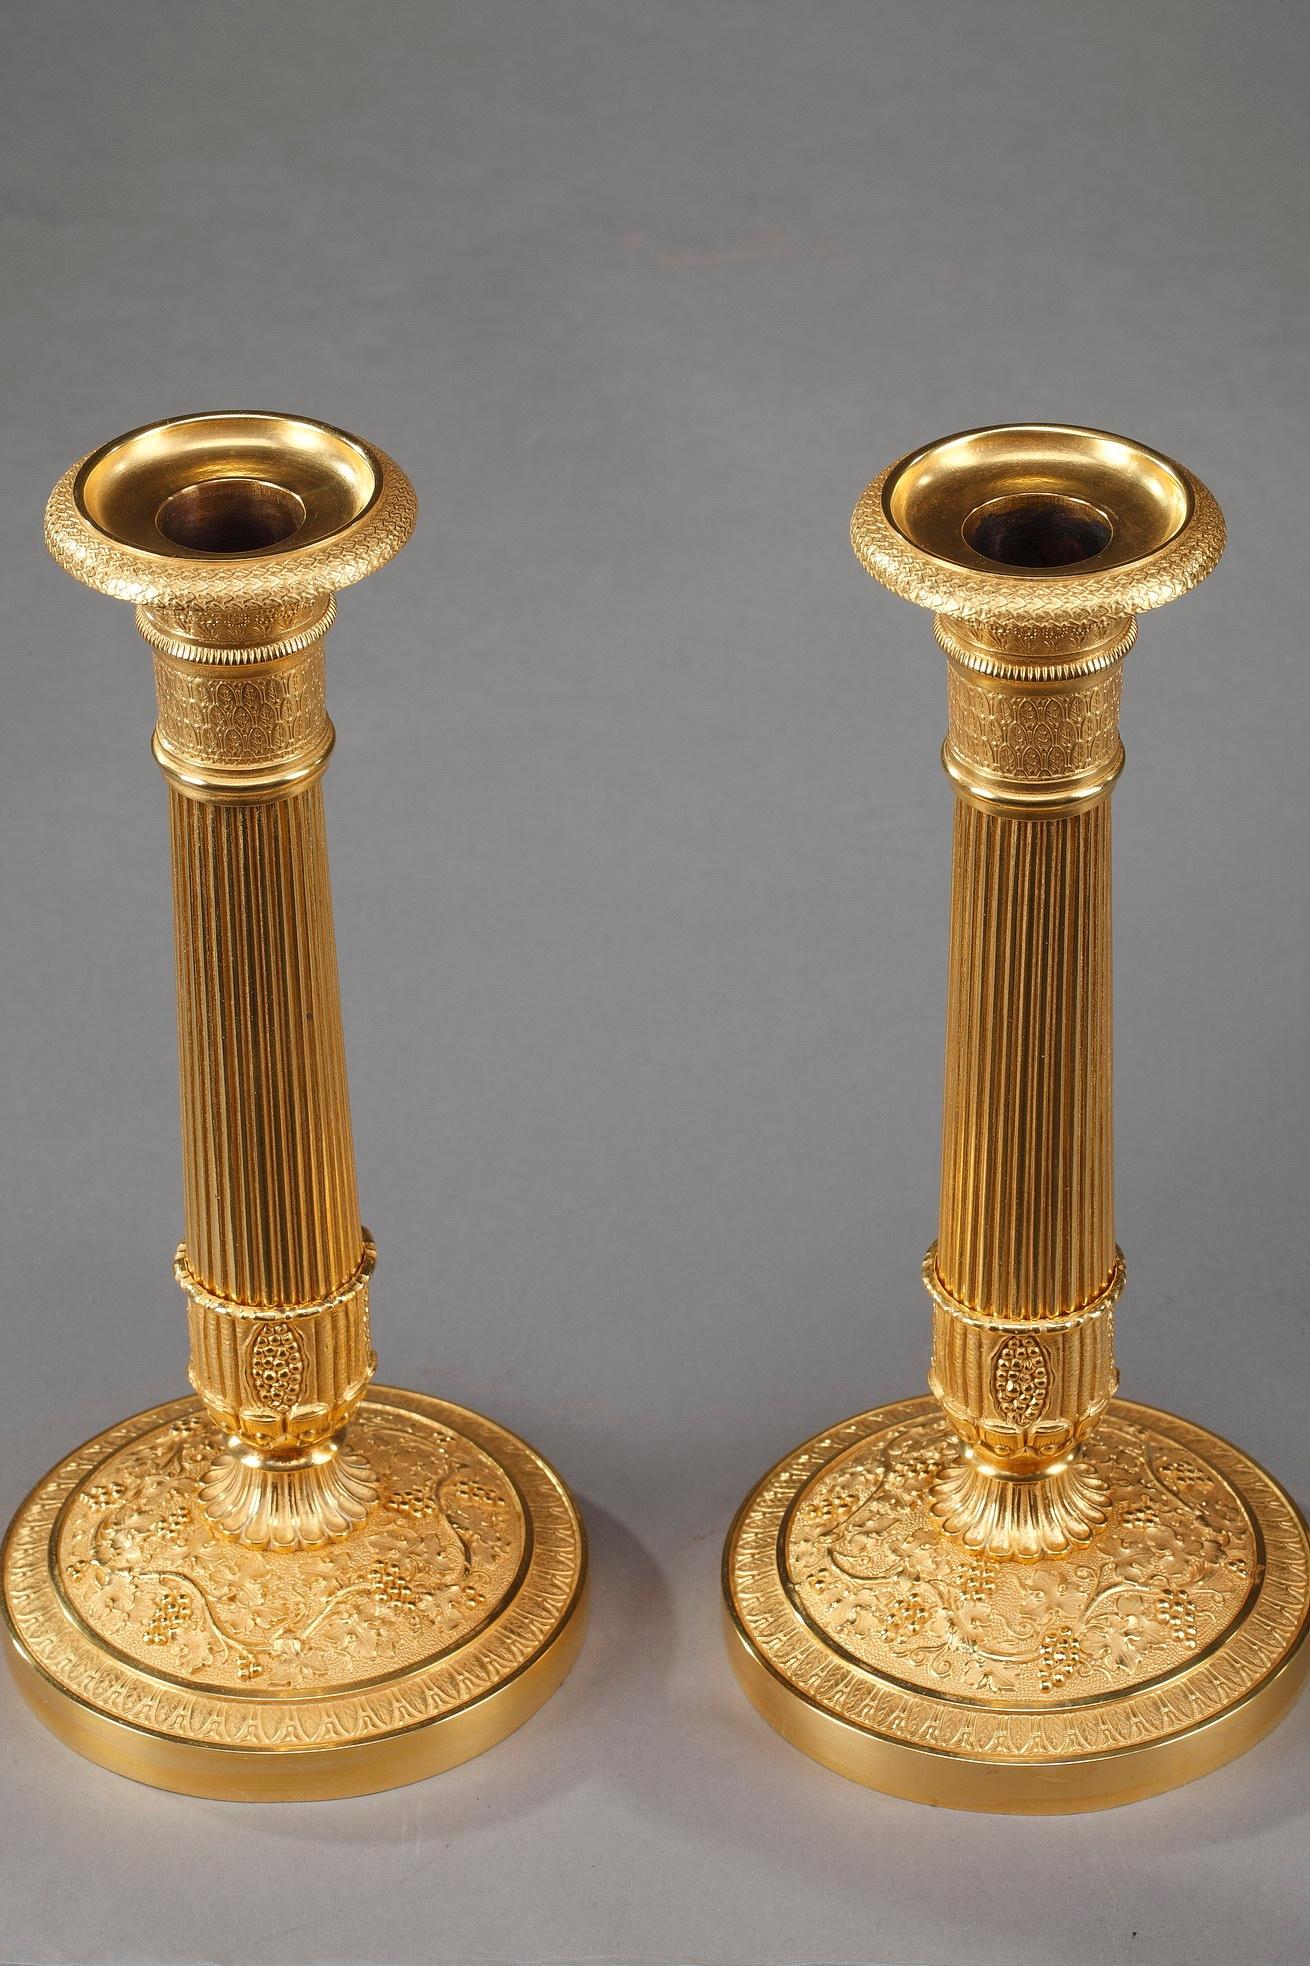 Pair of gilt bronze candlesticks. Beautifully crafted, these candelabra are exemplary of the Restauration aesthetic. The fluted stems chiseled with seeds, foliage and flowers, are supported by a round base adorned with a garland of grape vines on